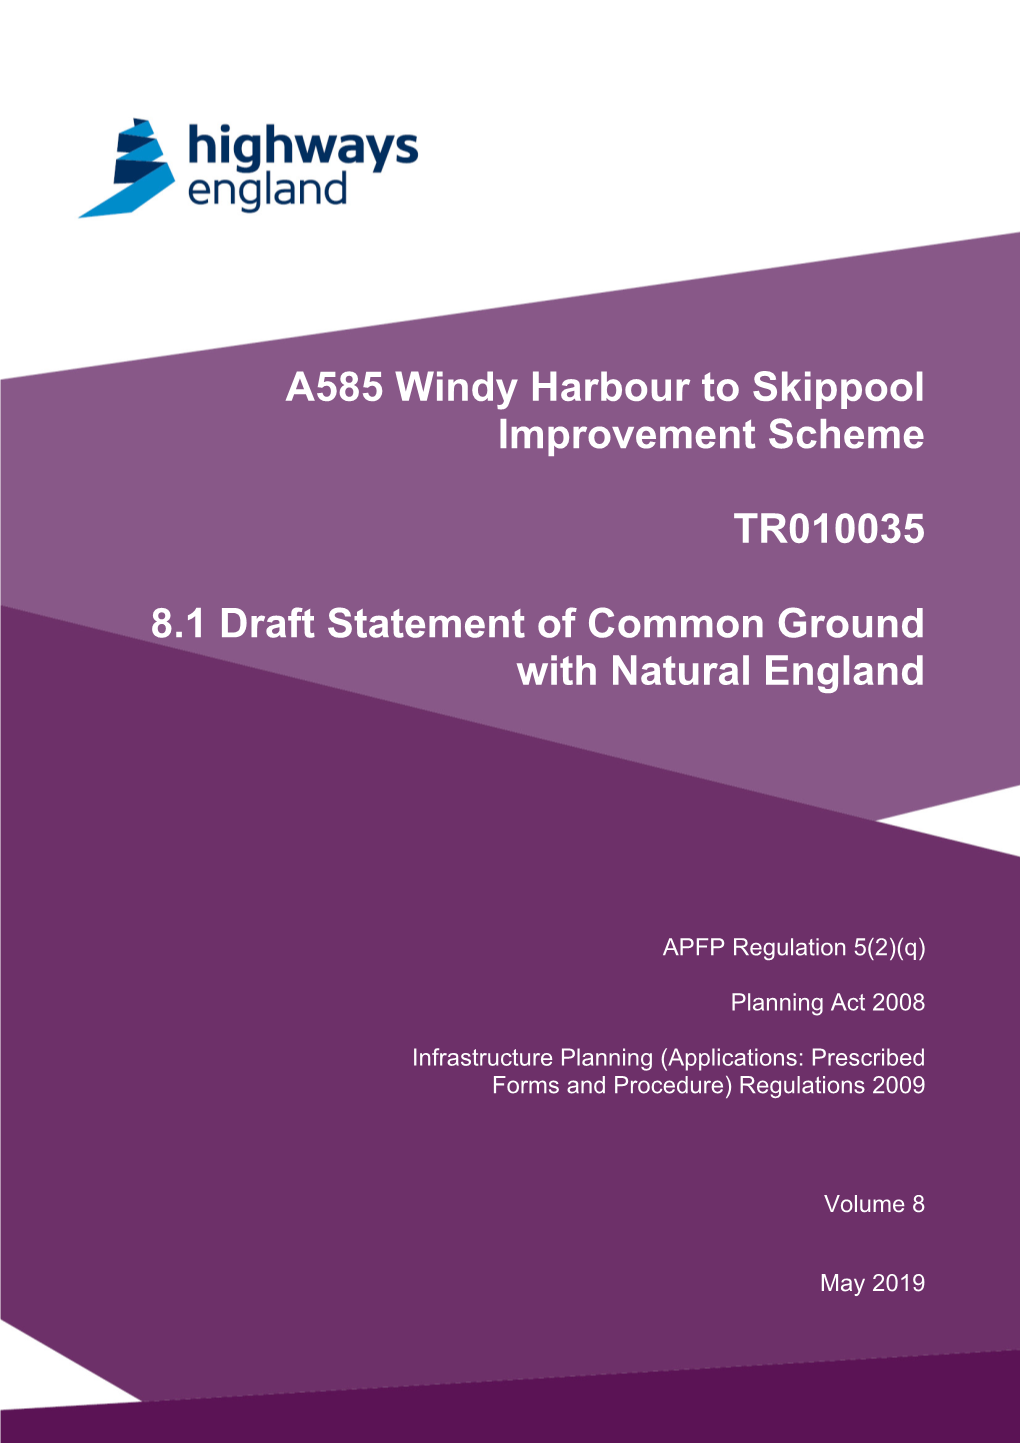 A585 Windy Harbour to Skippool Improvement Scheme TR010035 8.1 Draft Statement of Common Ground with Natural England